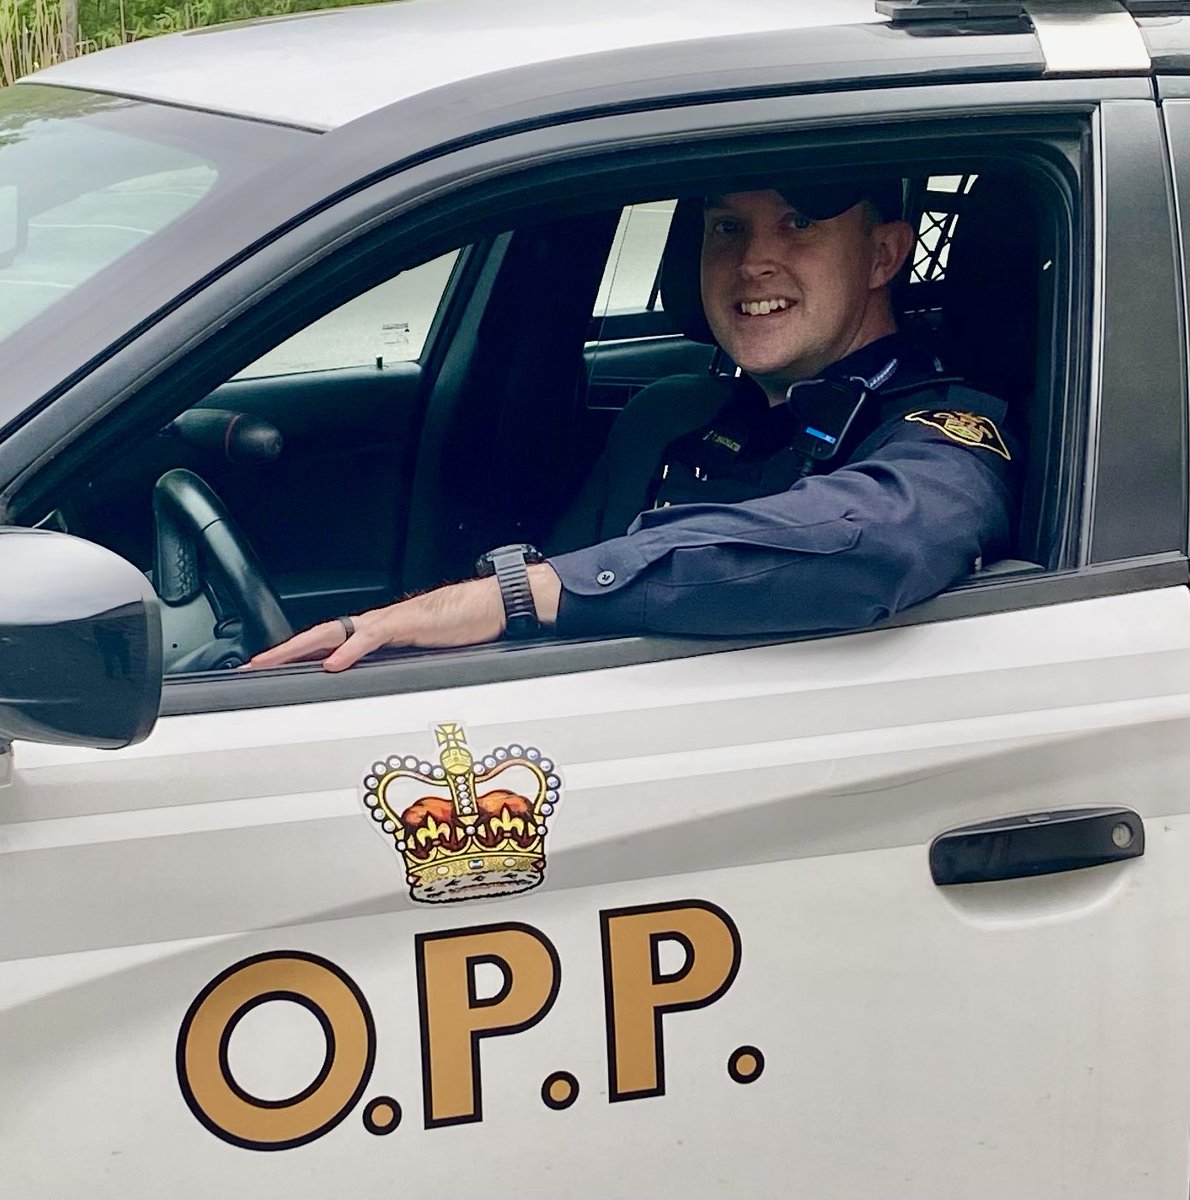 #PoliceWeekON is a great time to introduce #GrenvilleOPP's newest member, PC Shackleton.
After a decade serving his #community as a Paramedic, he's changed careers to fulfill a dream & learn another side of first response. Welcome!
Learn what it takes @ OPP.ca^dh